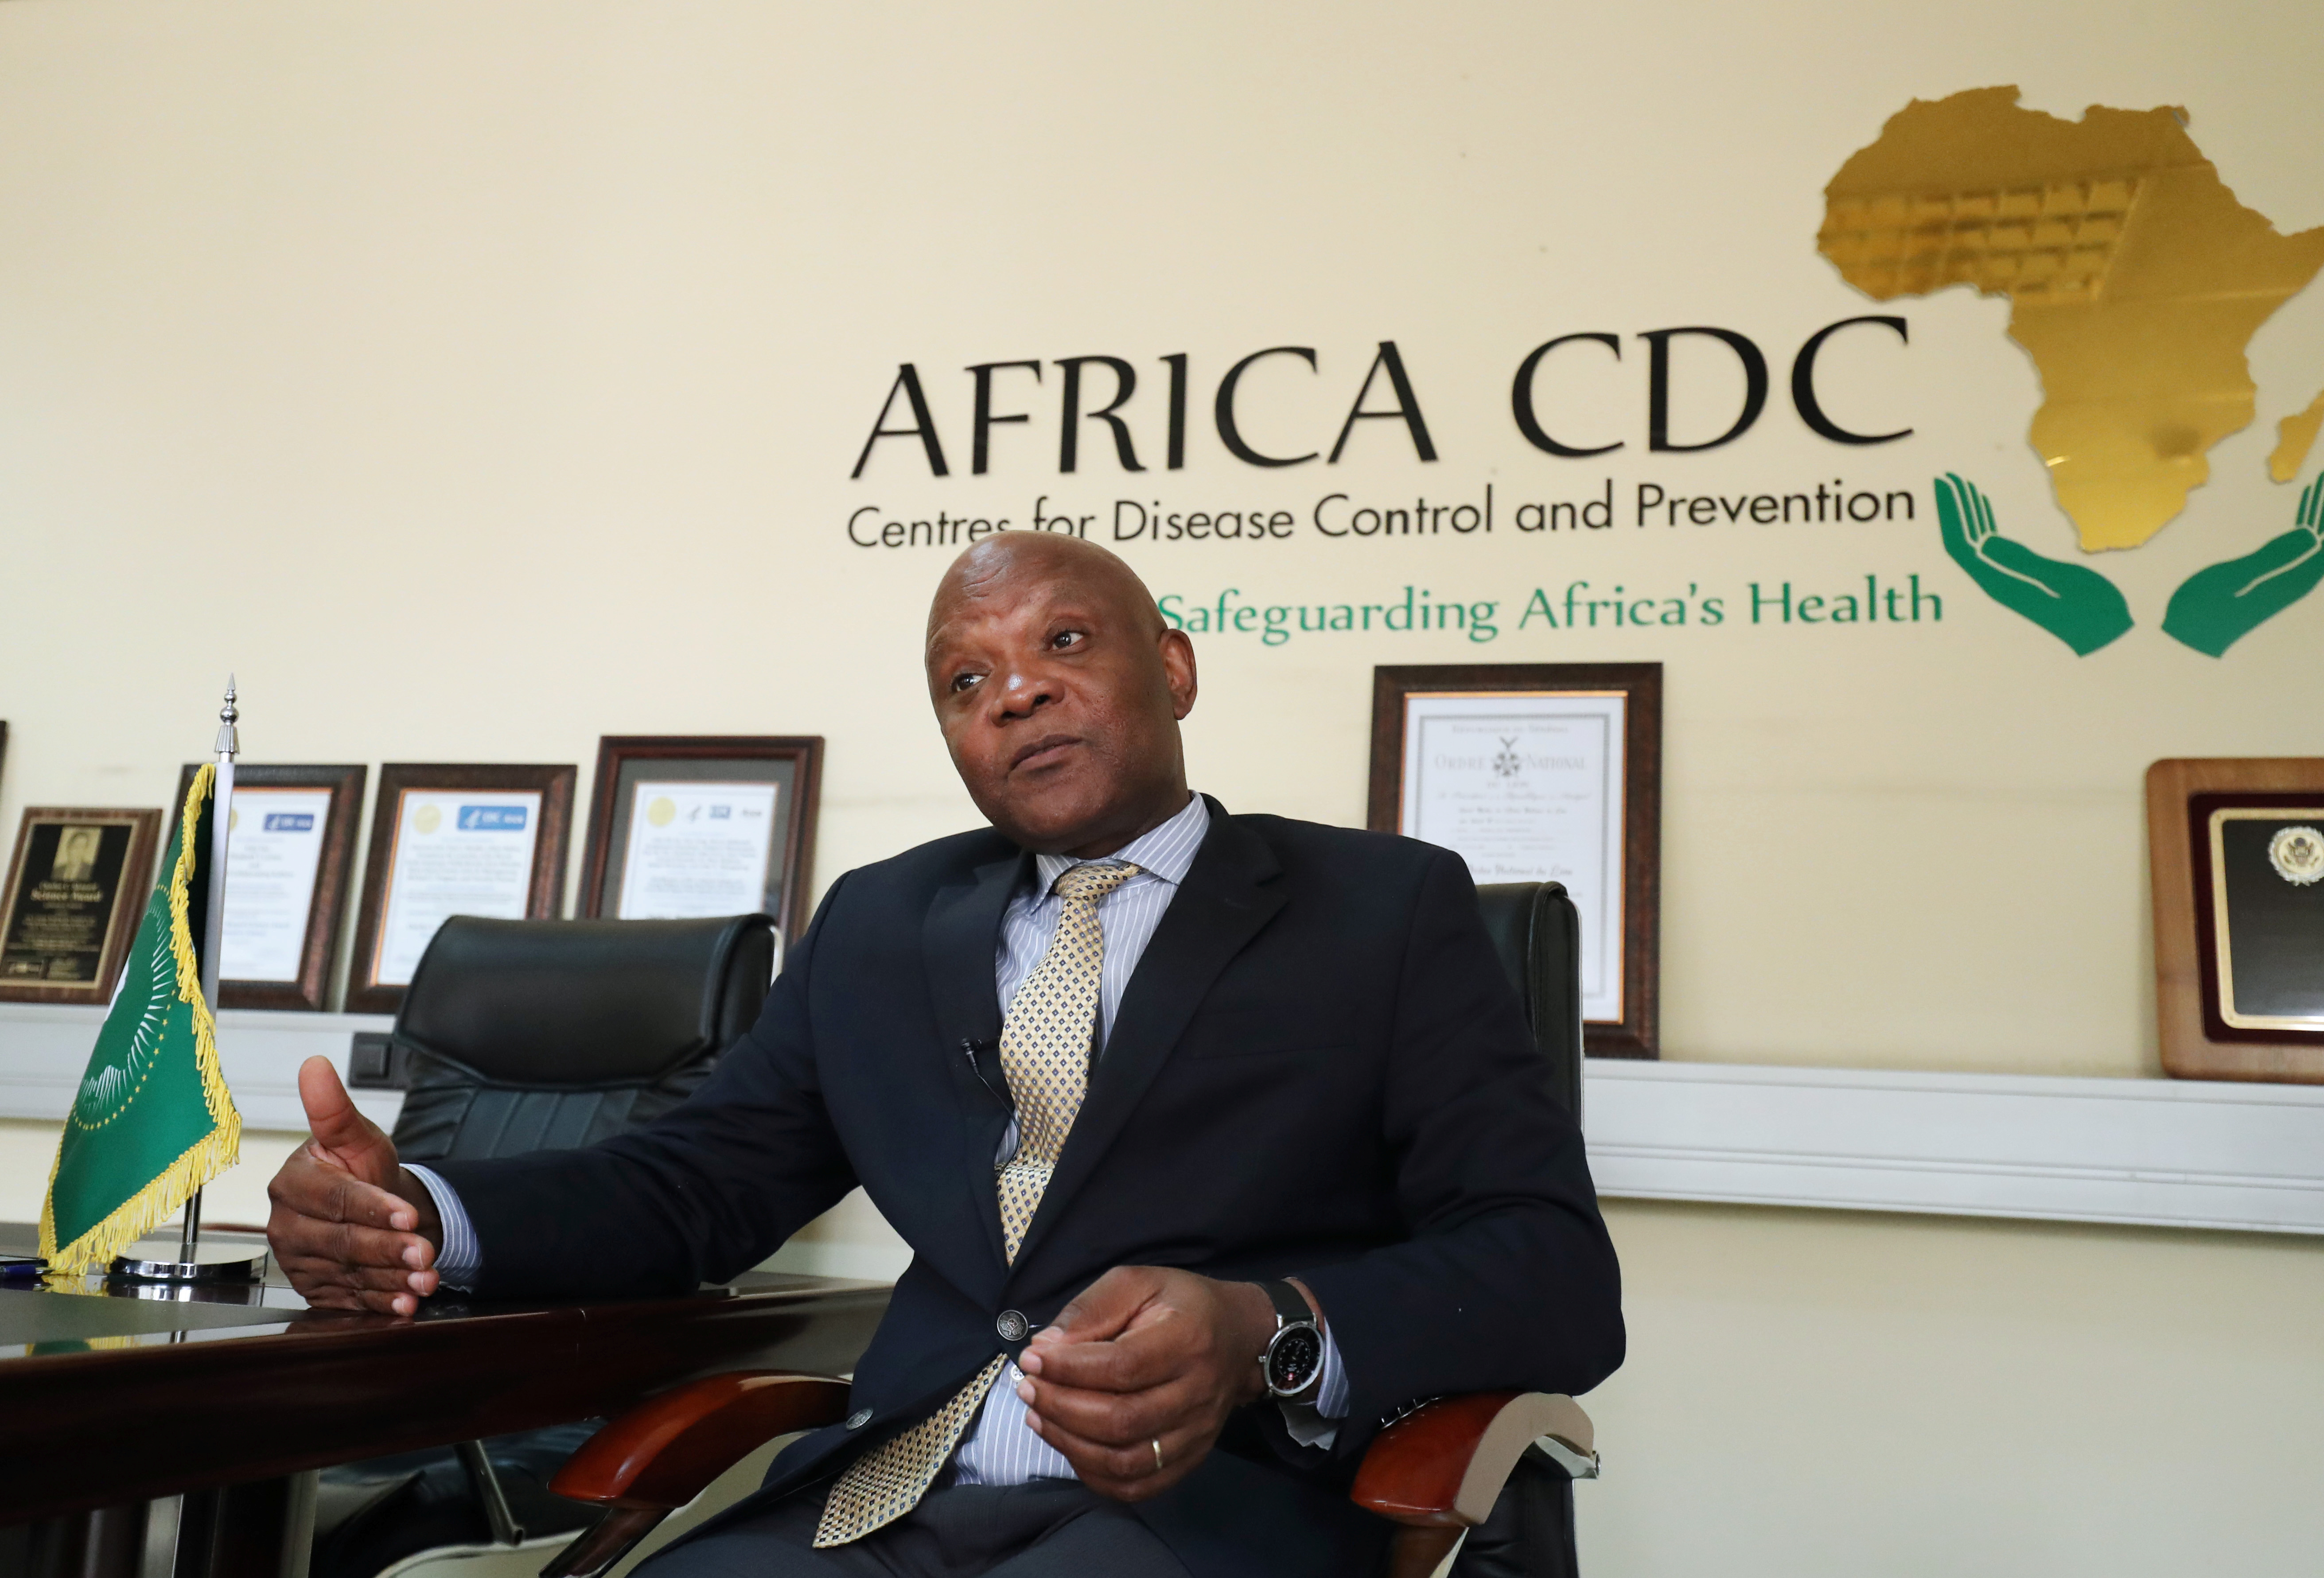 John Nkengasong, Africa's Director of the Centers for Disease Control (CDC), speaks during an interview with Reuters at the African Union (AU) Headquarters in Addis Ababa, Ethiopia March 11, 2020. REUTERS/Tiksa Negeri